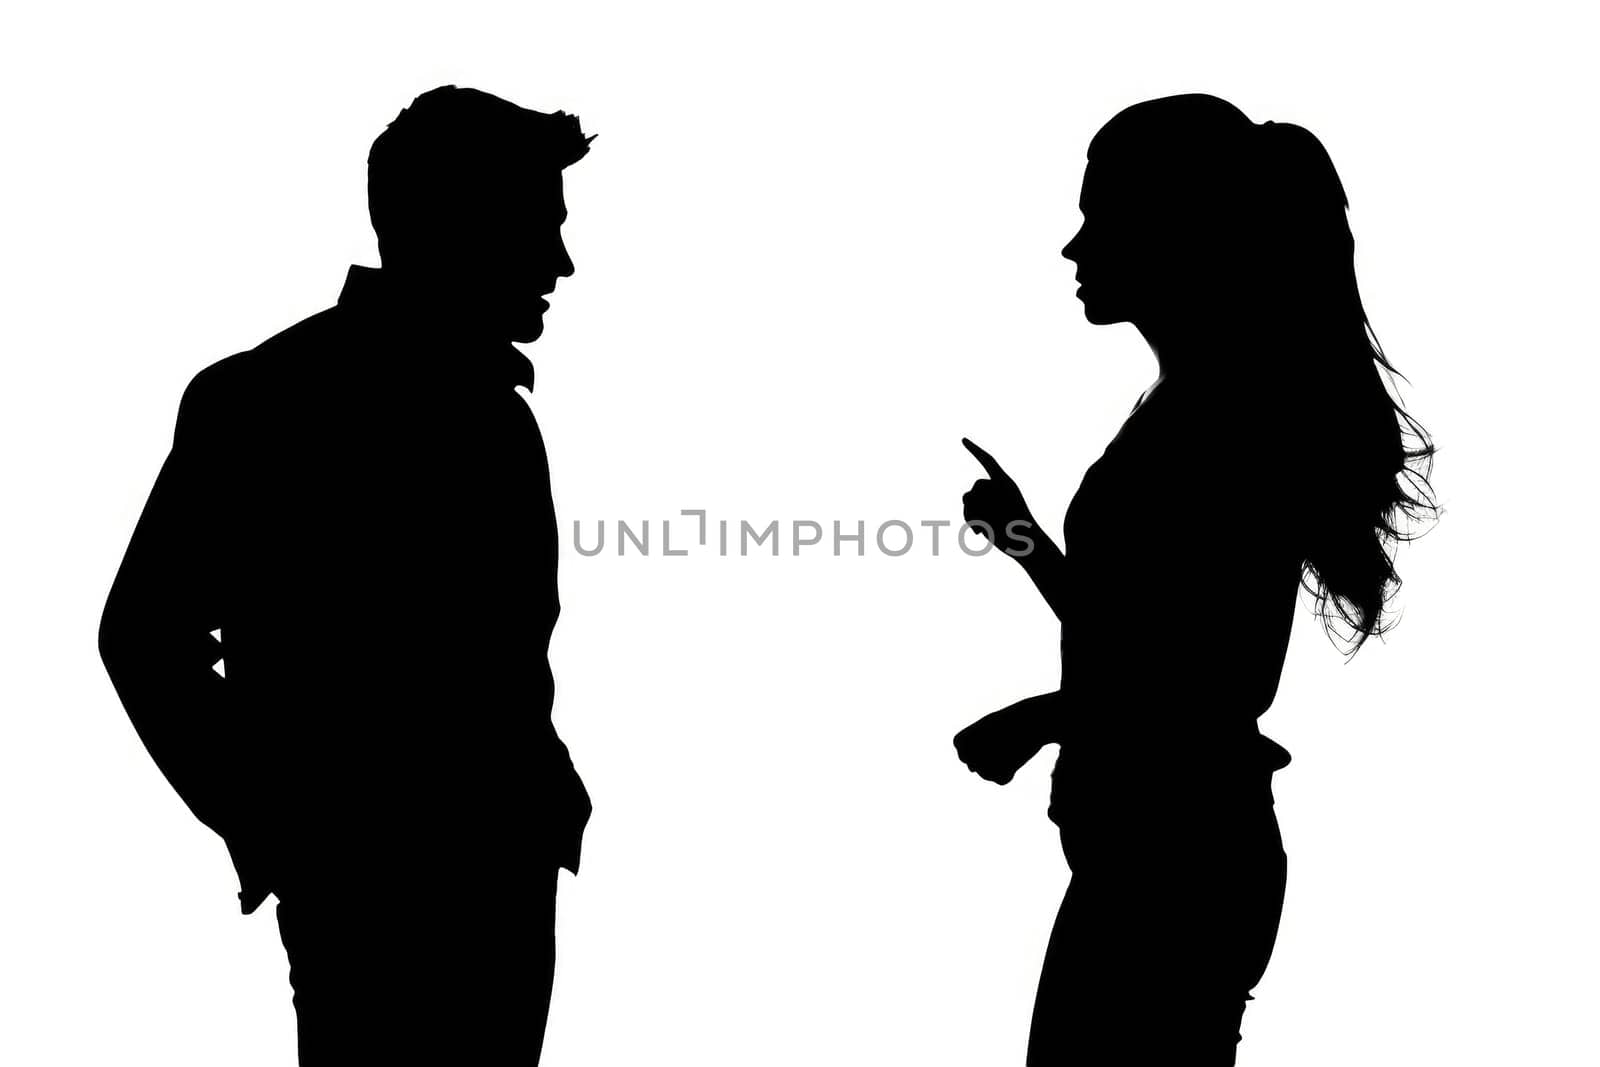 A black silhouette of a couple arguing